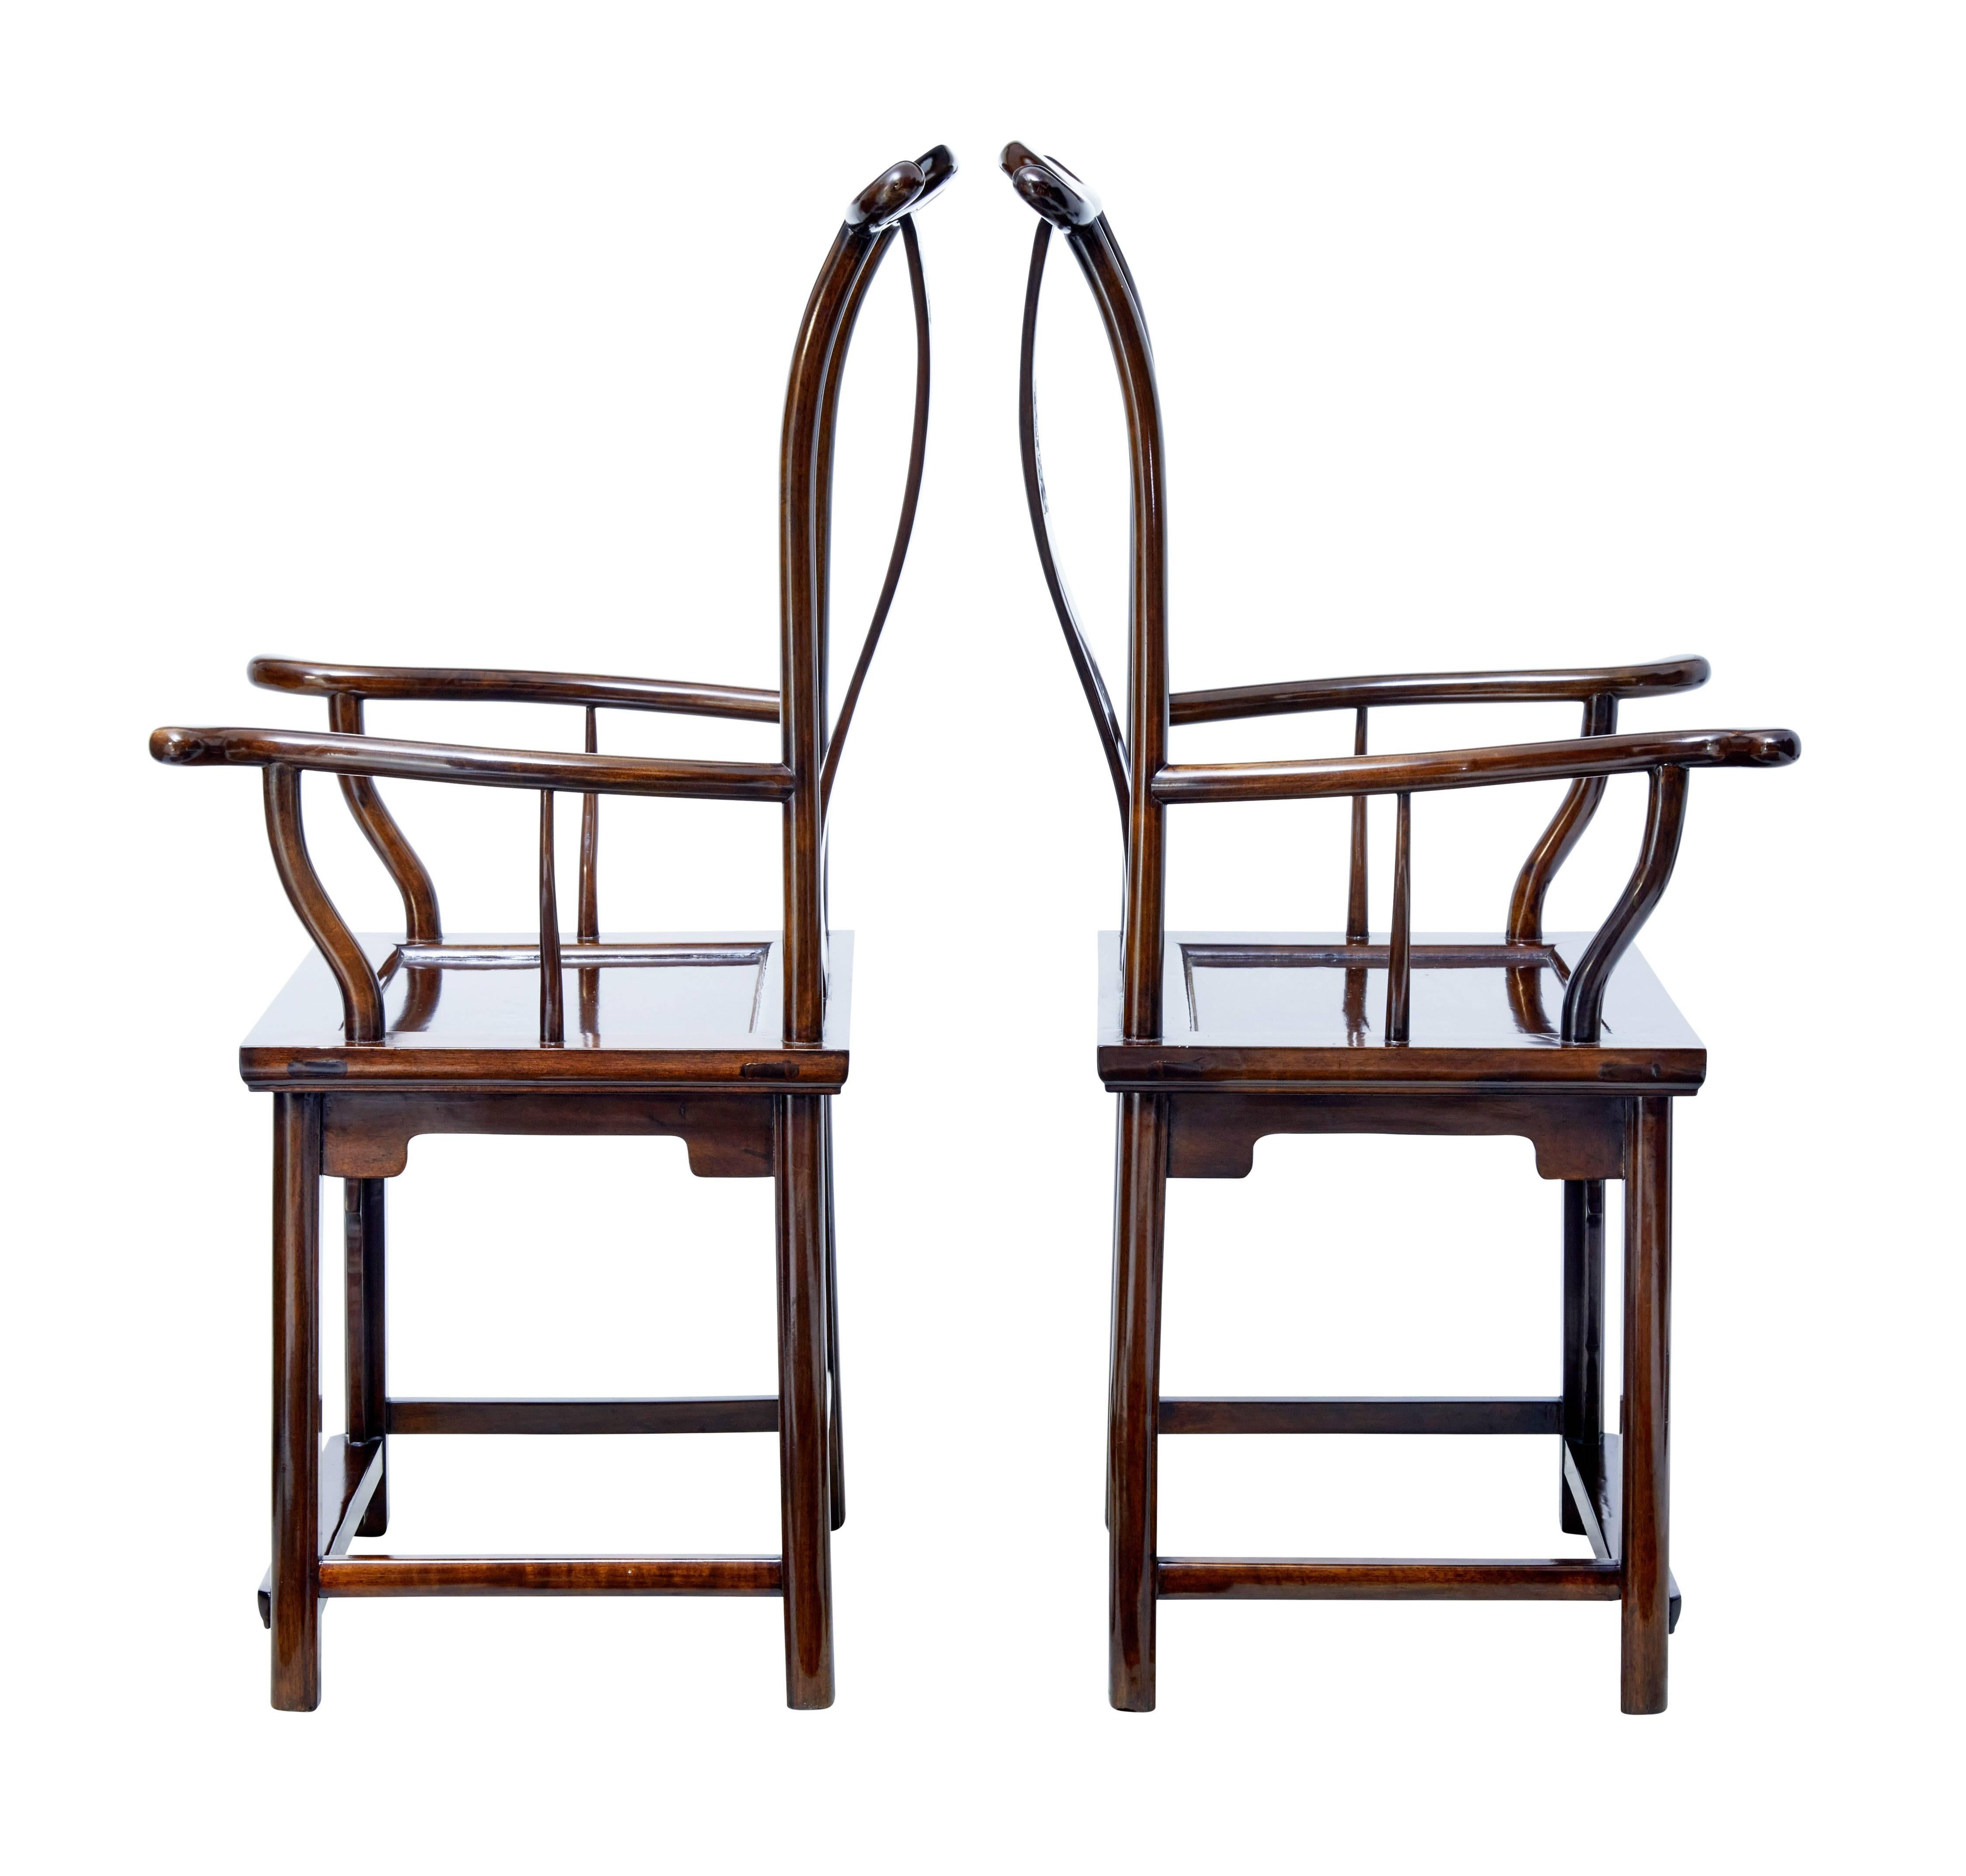 Elegant pair of Chinese export yoke back armchairs, circa 1890.

Good color and patina, with carved design in the solid on the backrest.

Yoke backrest is complimented by the beautiful flowing arms. Panel seat, with carved decoration to the